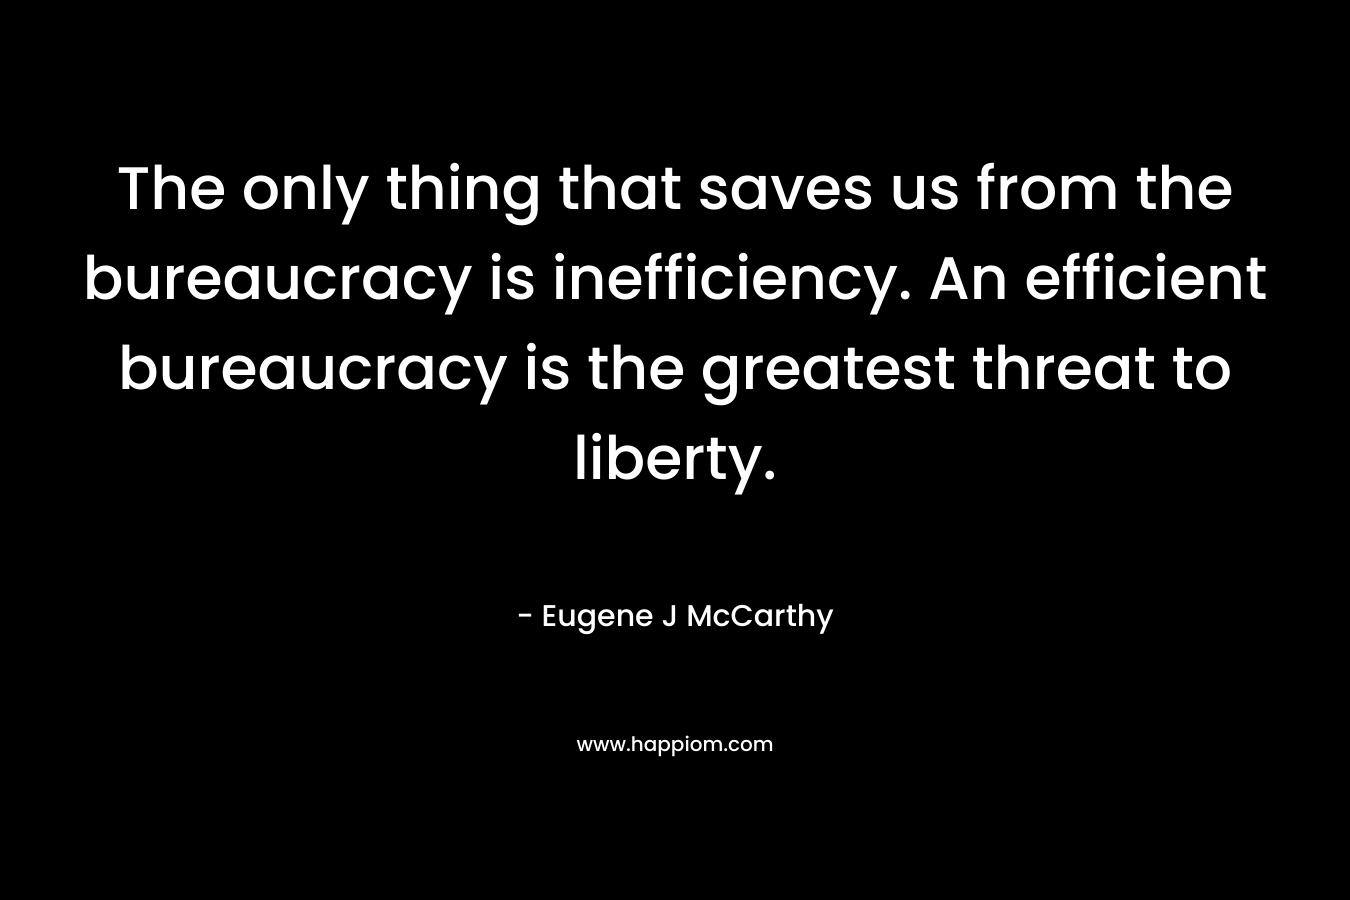 The only thing that saves us from the bureaucracy is inefficiency. An efficient bureaucracy is the greatest threat to liberty. – Eugene J McCarthy